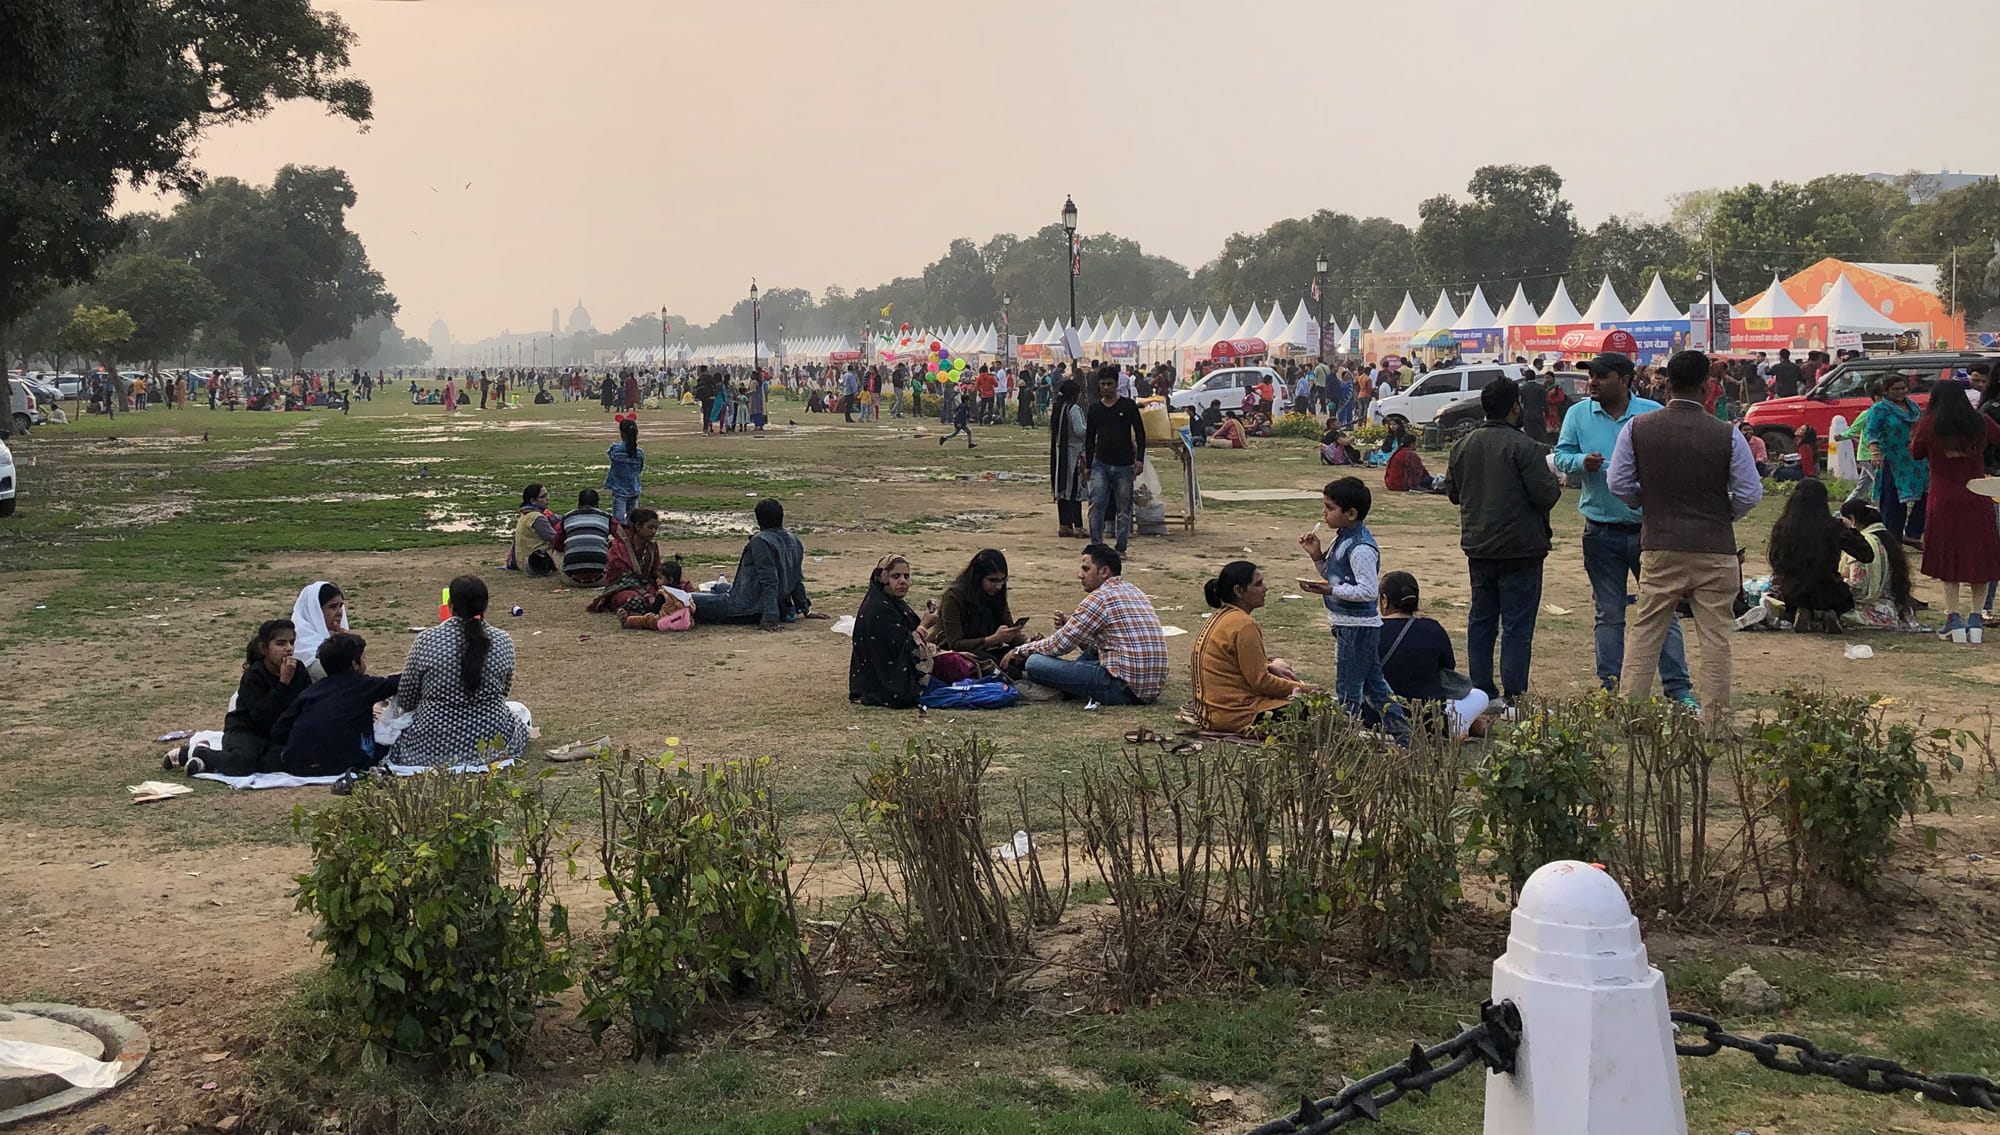 Democratization of Kingsway: The public enjoying a fair on the Rajpath Lawns, against the backdrop of Rashtrapati Bhawan on a late, winter afternoon, 2020. Source: Author